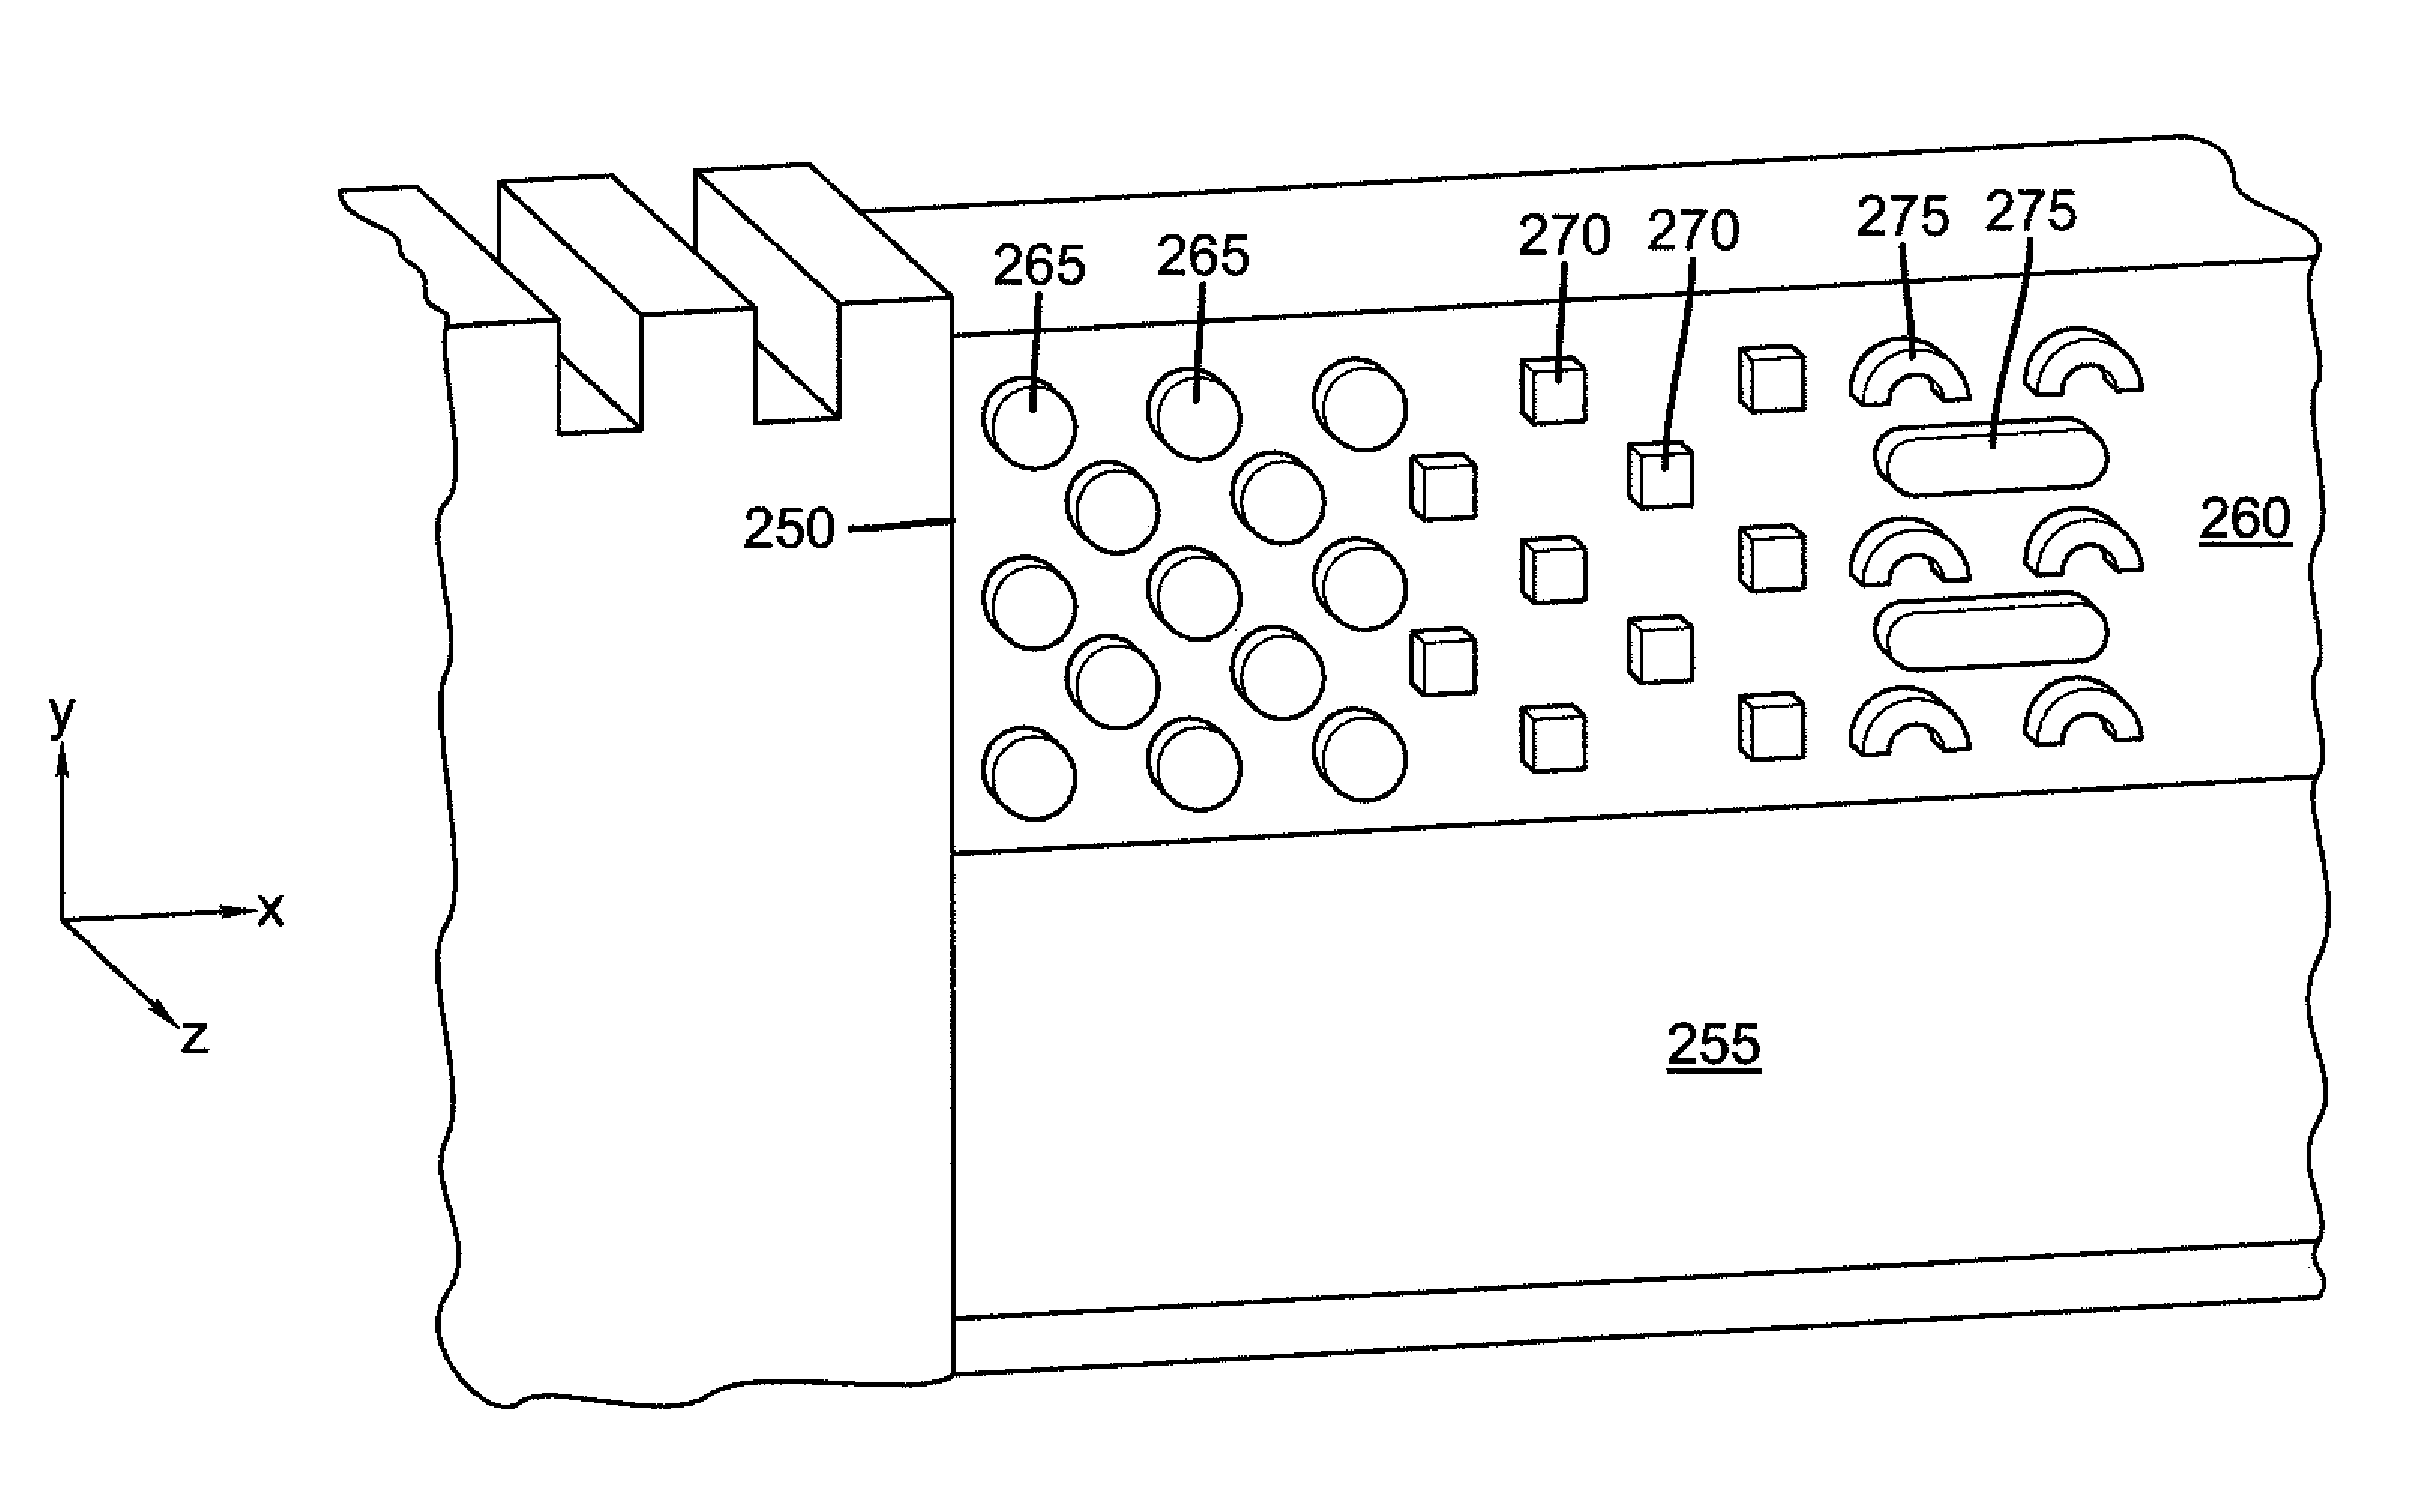 Delivery device for deposition